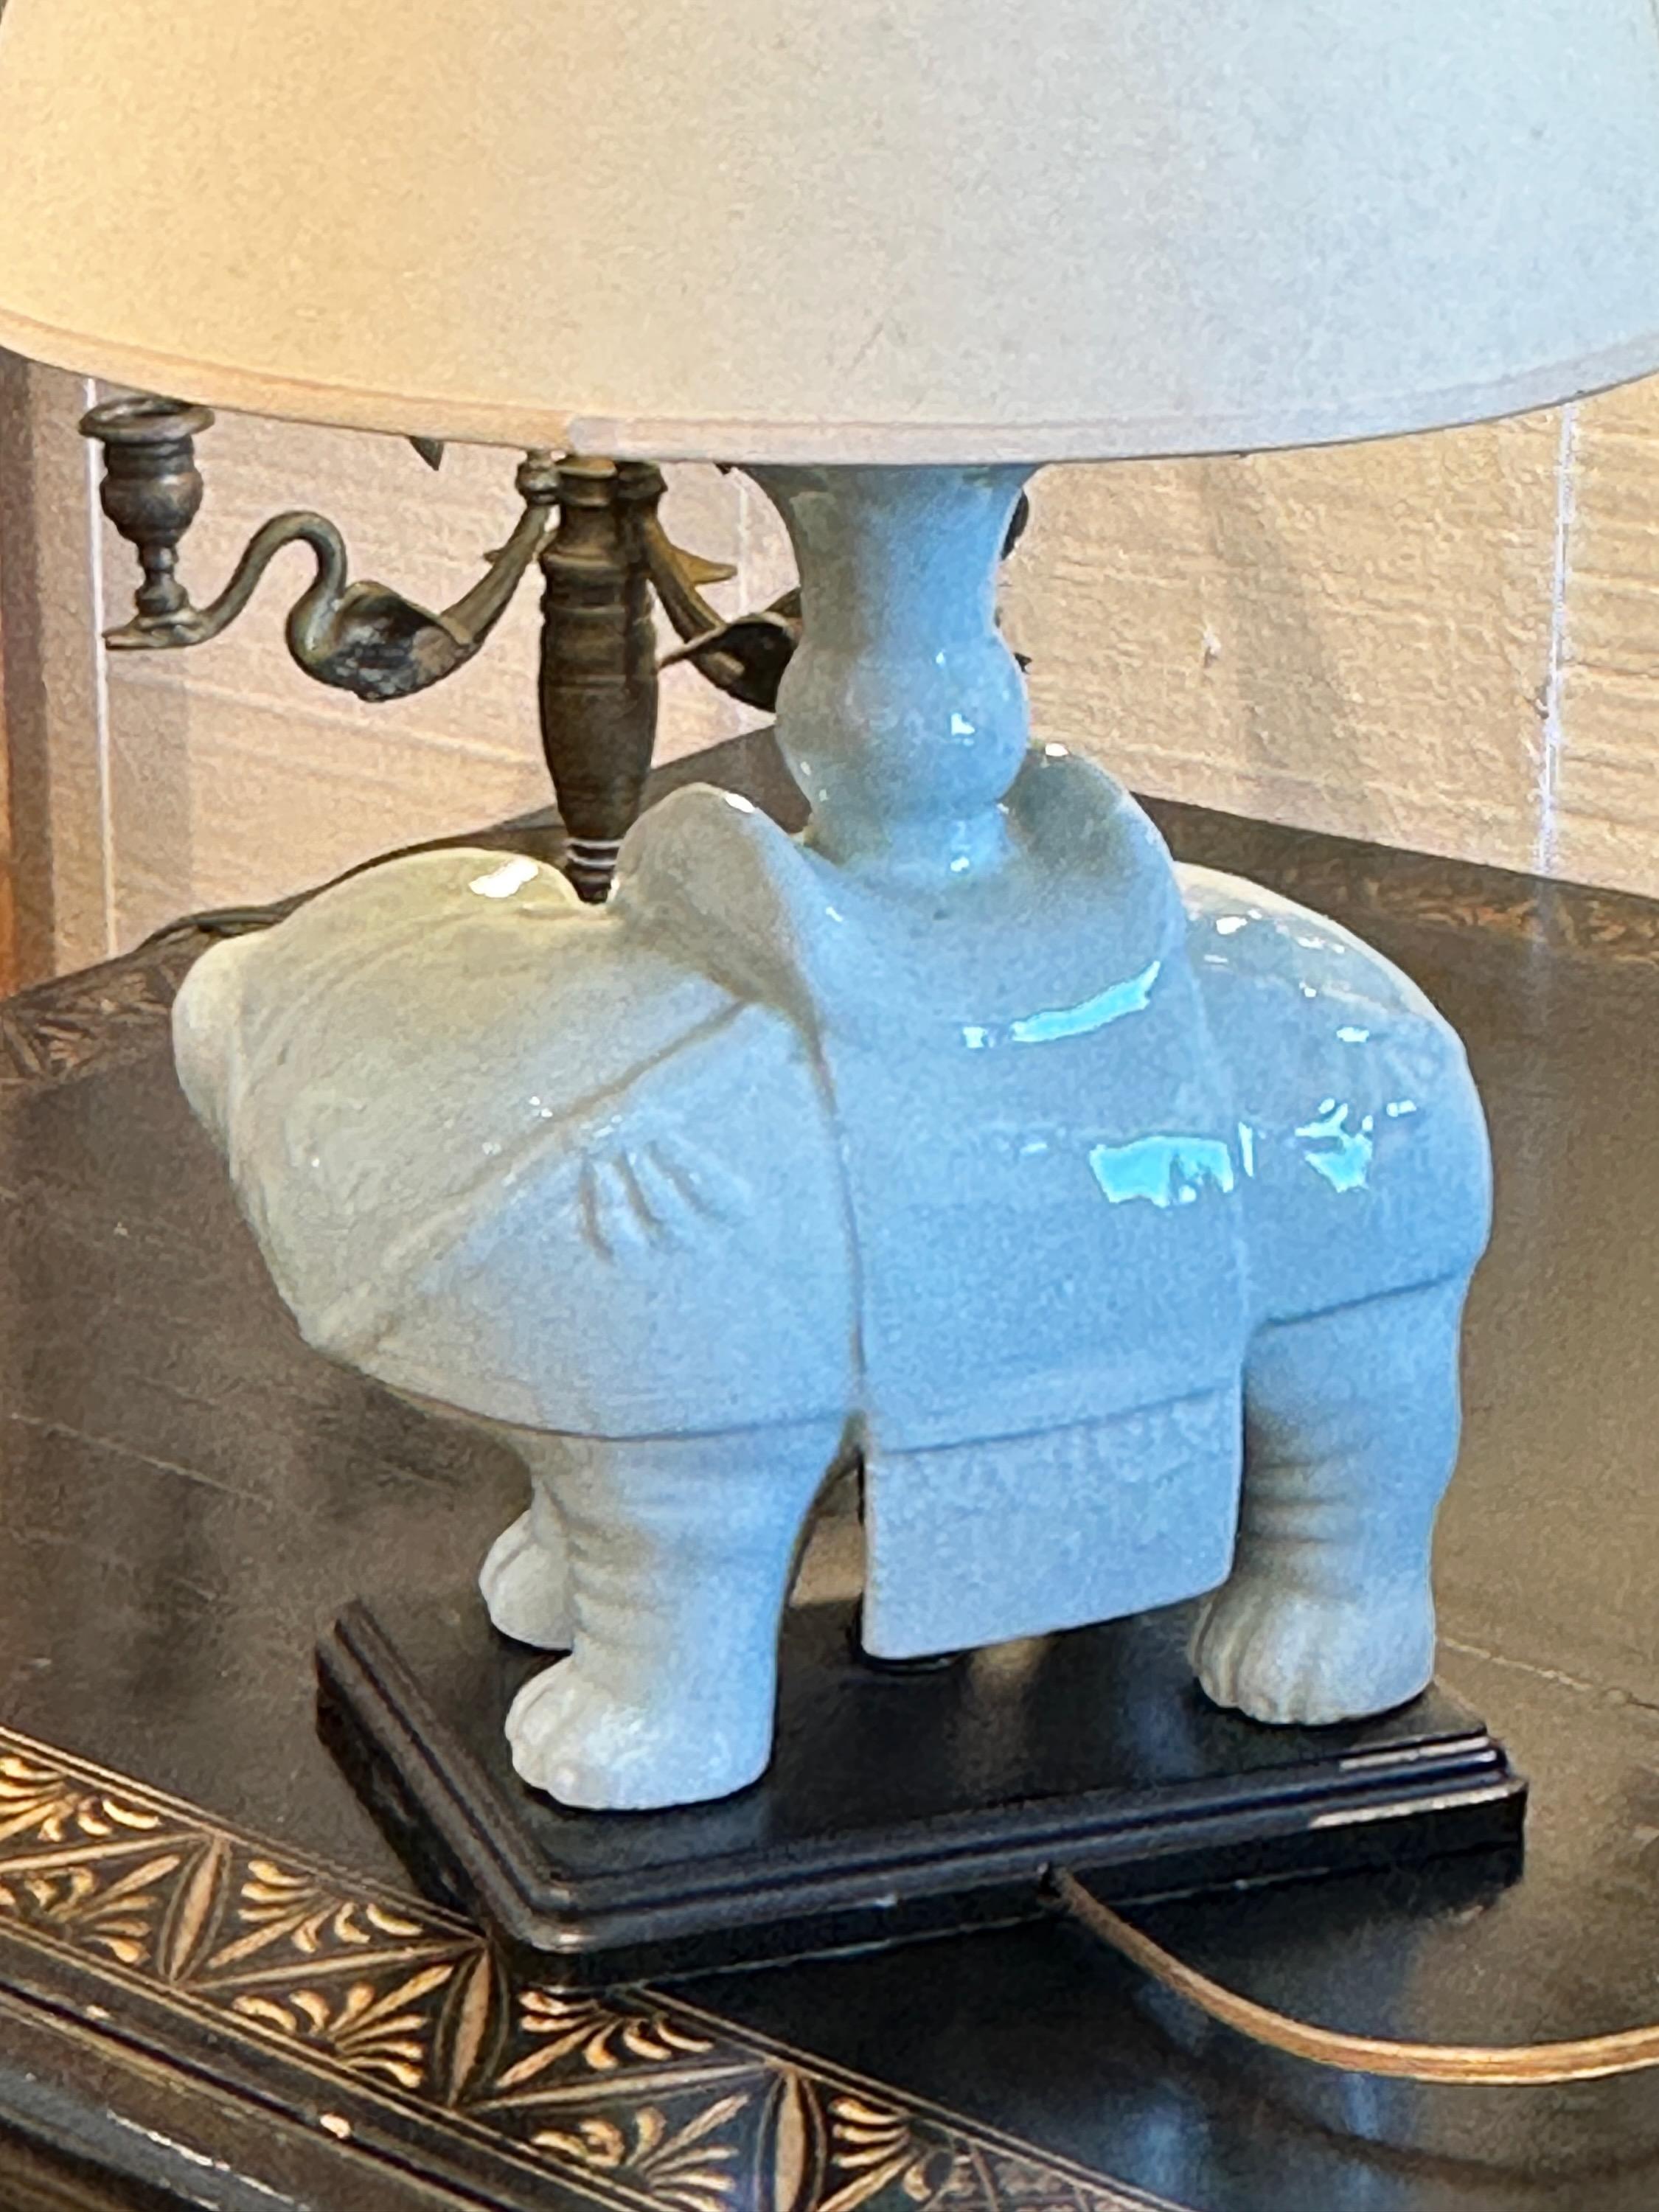 A Mid 20th Century Elephant Lamp with Nice details front and back view